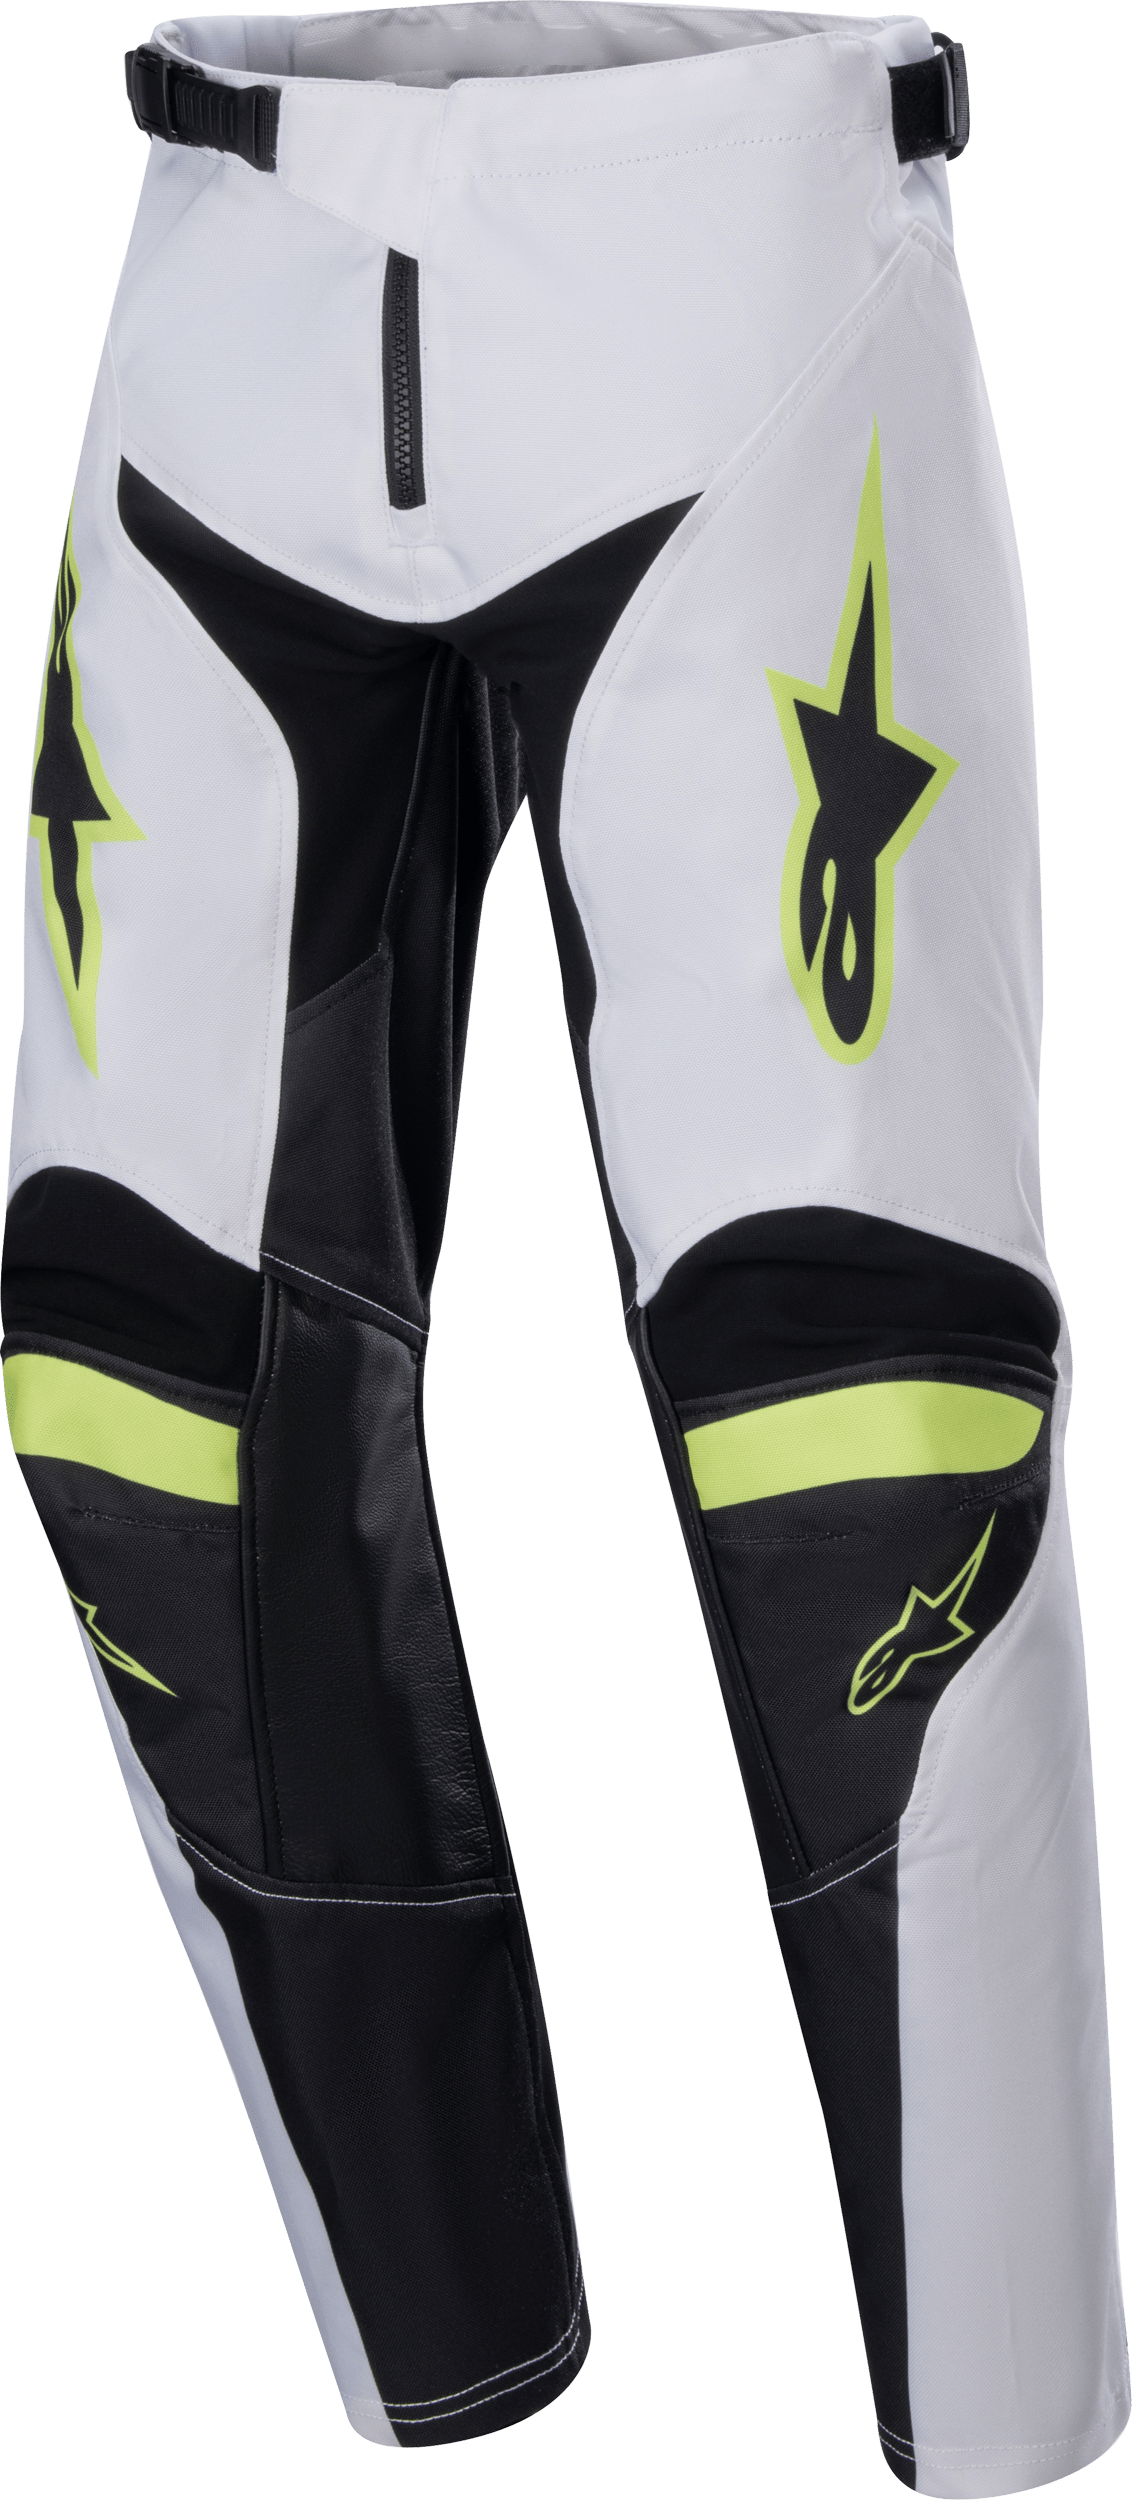 Western Powersports Pants White/Neon Red/Fluorescent Yellow / 22 Youth Racer Lucent Pants By Alpinestars 3743724-2029-22